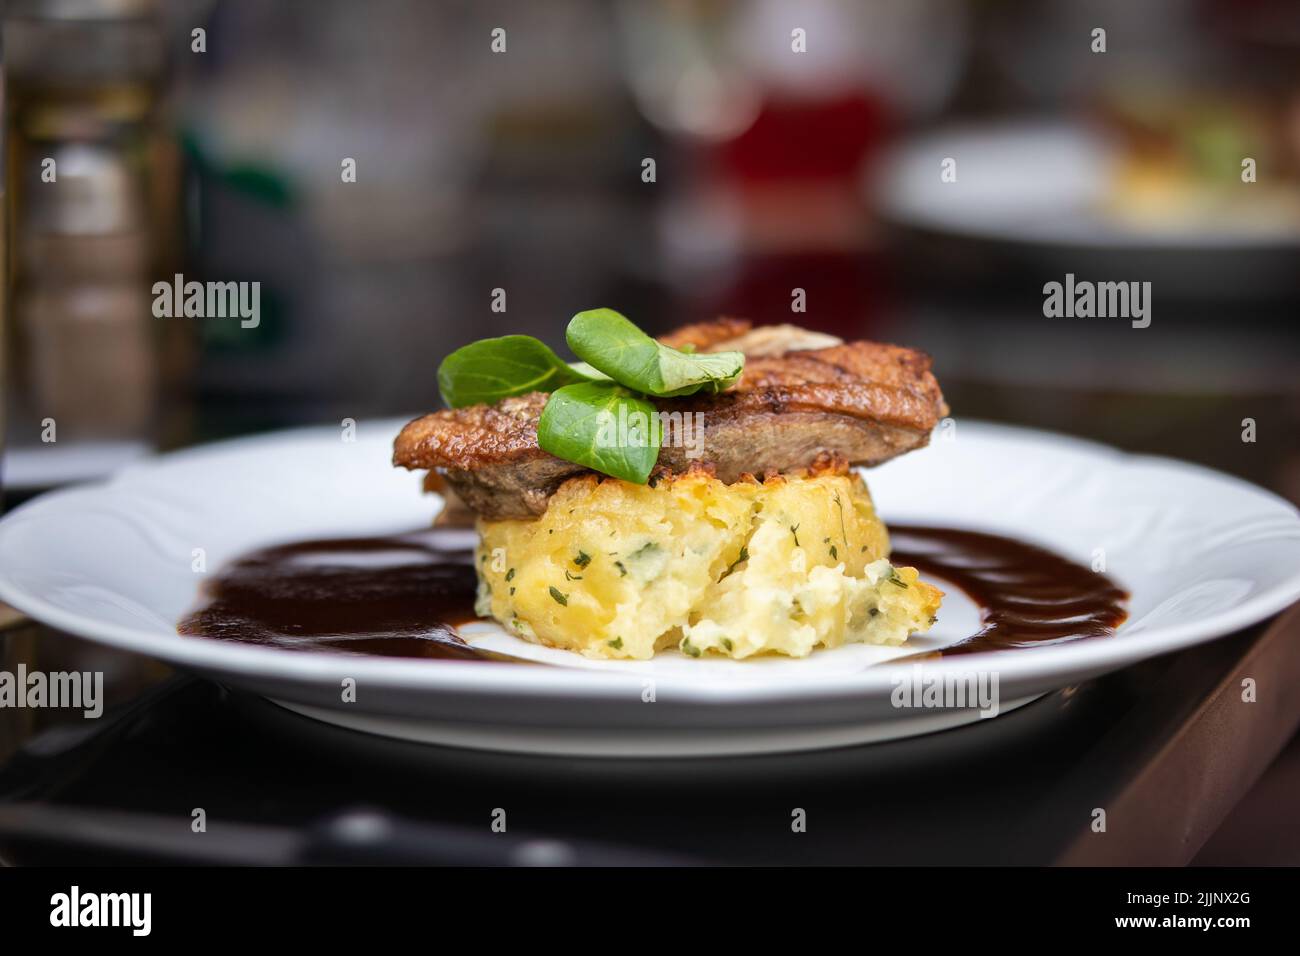 Appetizing Food on a White Plate in a Restaurant. Shallow Depth of Field of Grilled Duck Meat with Gratin Potatoes and Sauce. Stock Photo